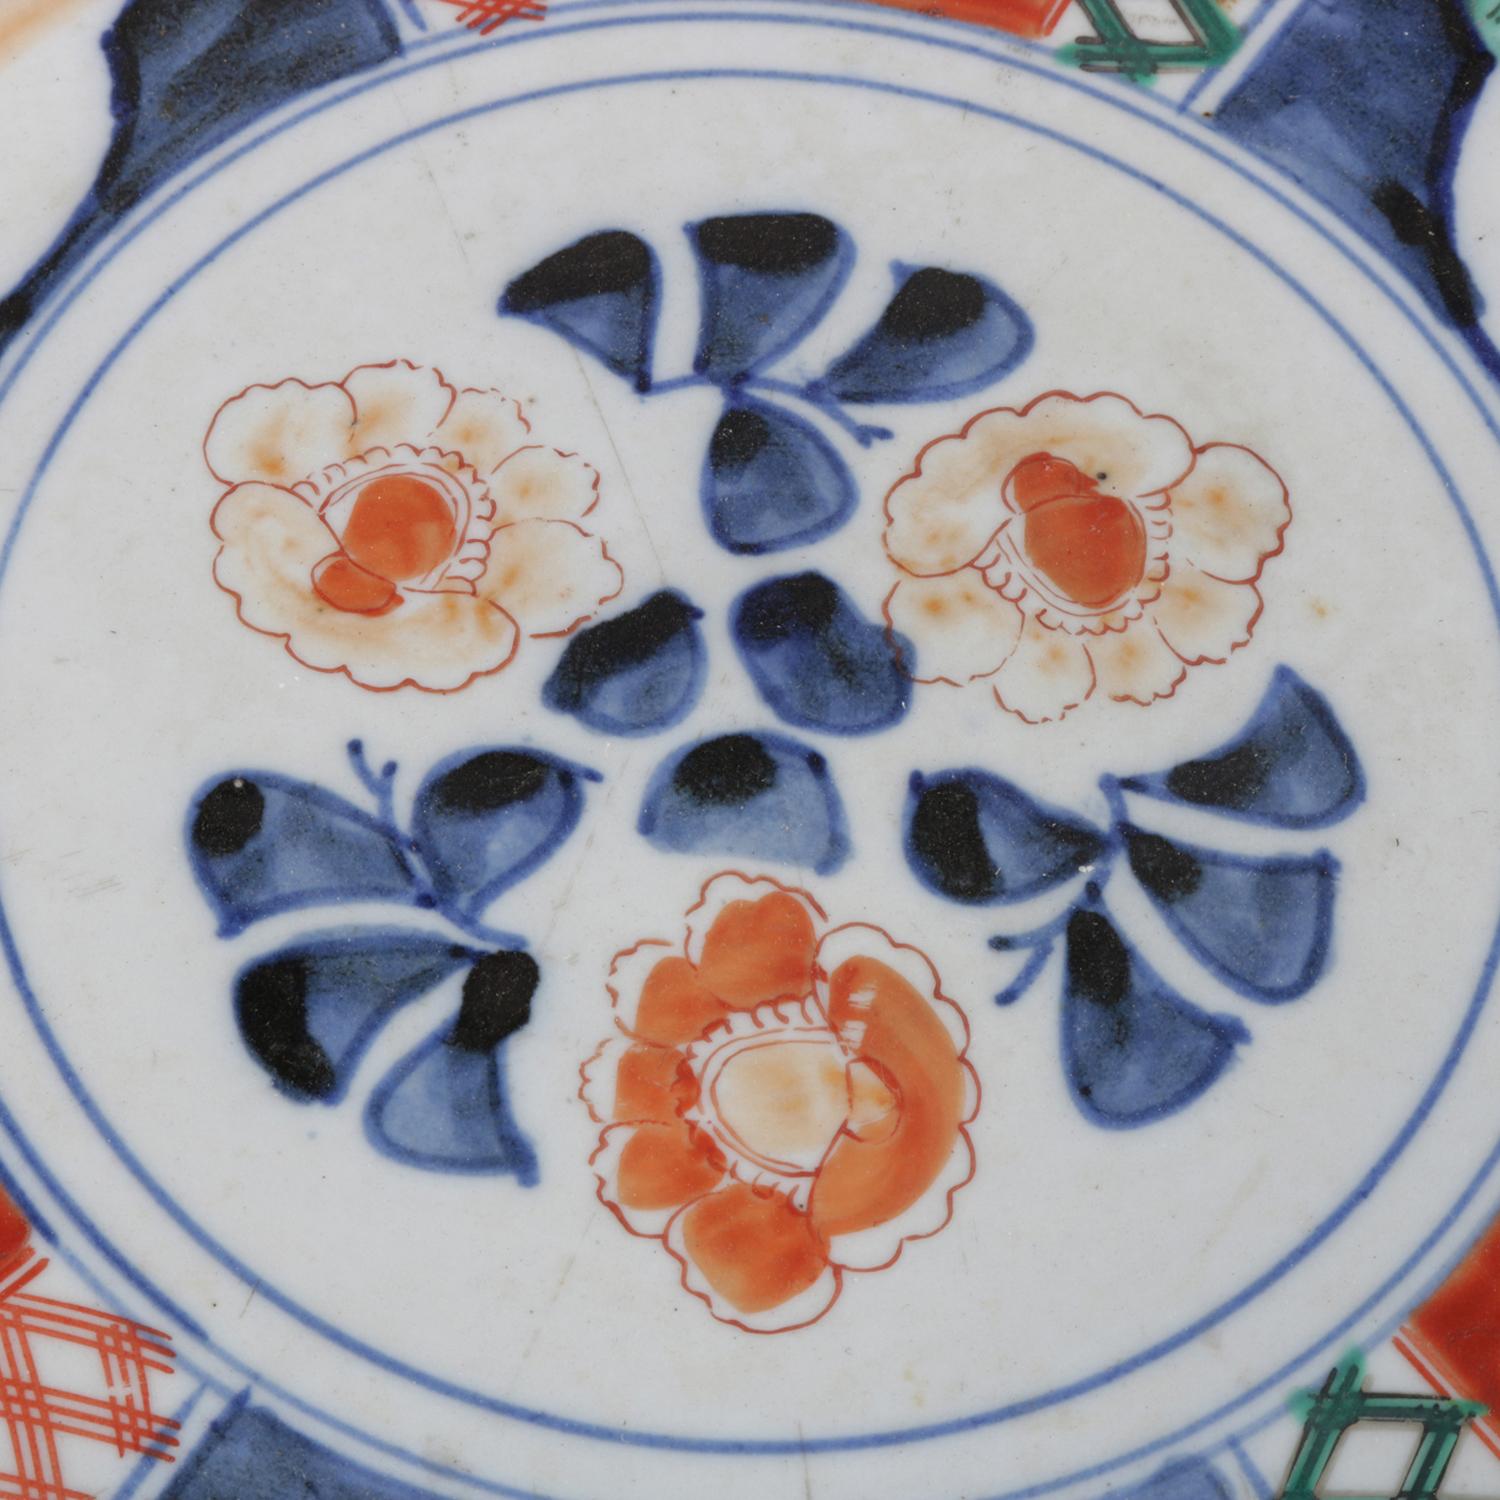 20th Century Antique Japanese Hand-Painted Floral Imari Porcelain Charger, circa 1900